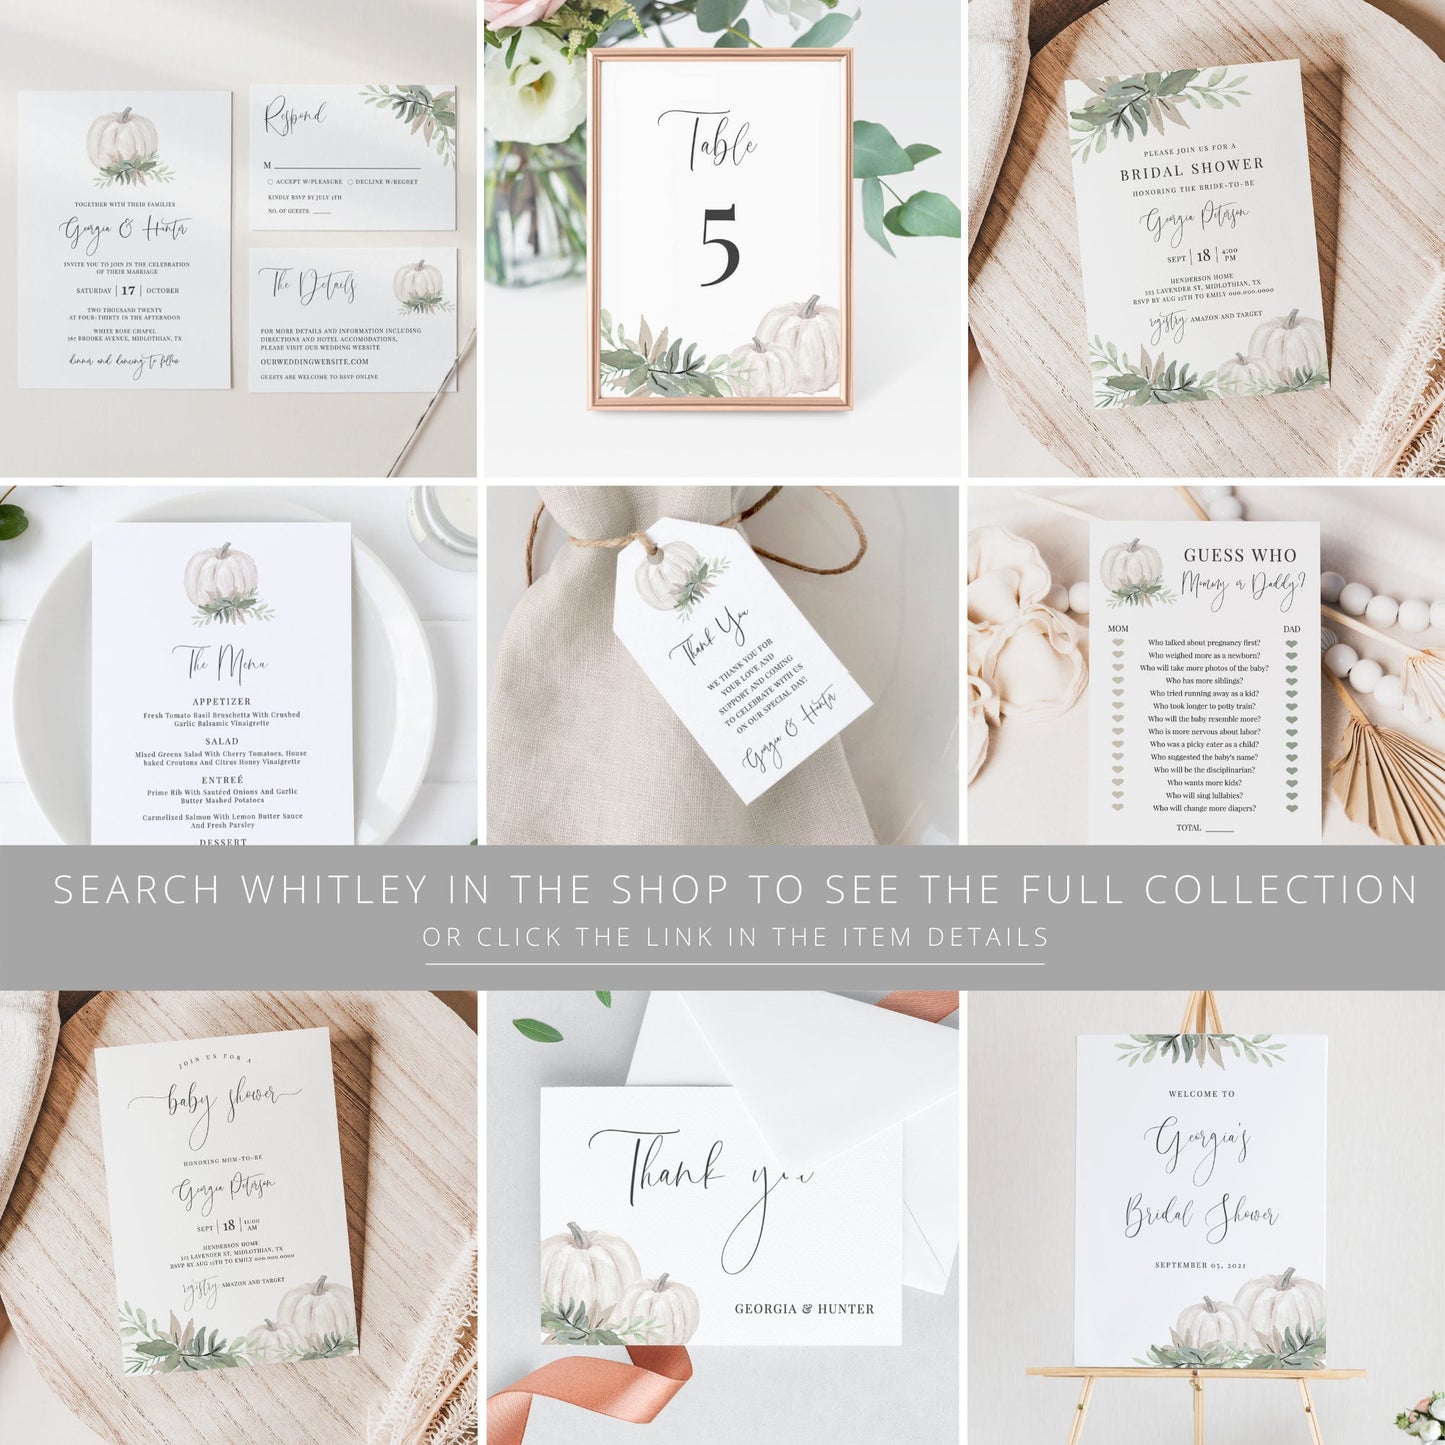 Editable How Well Do You Know the Bride and Groom Bridal Shower Games White Sage Pumpkin Template